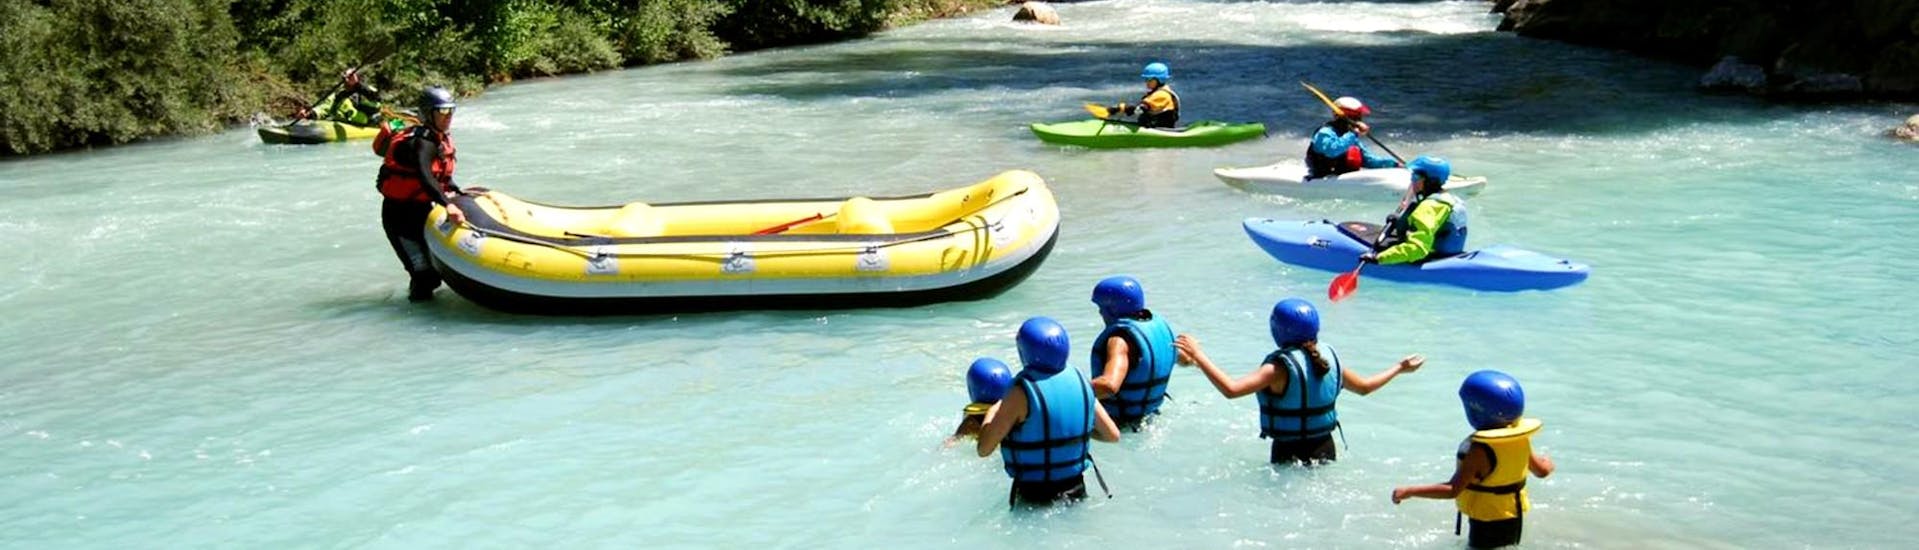 Discovery Rafting on the Guisane River.